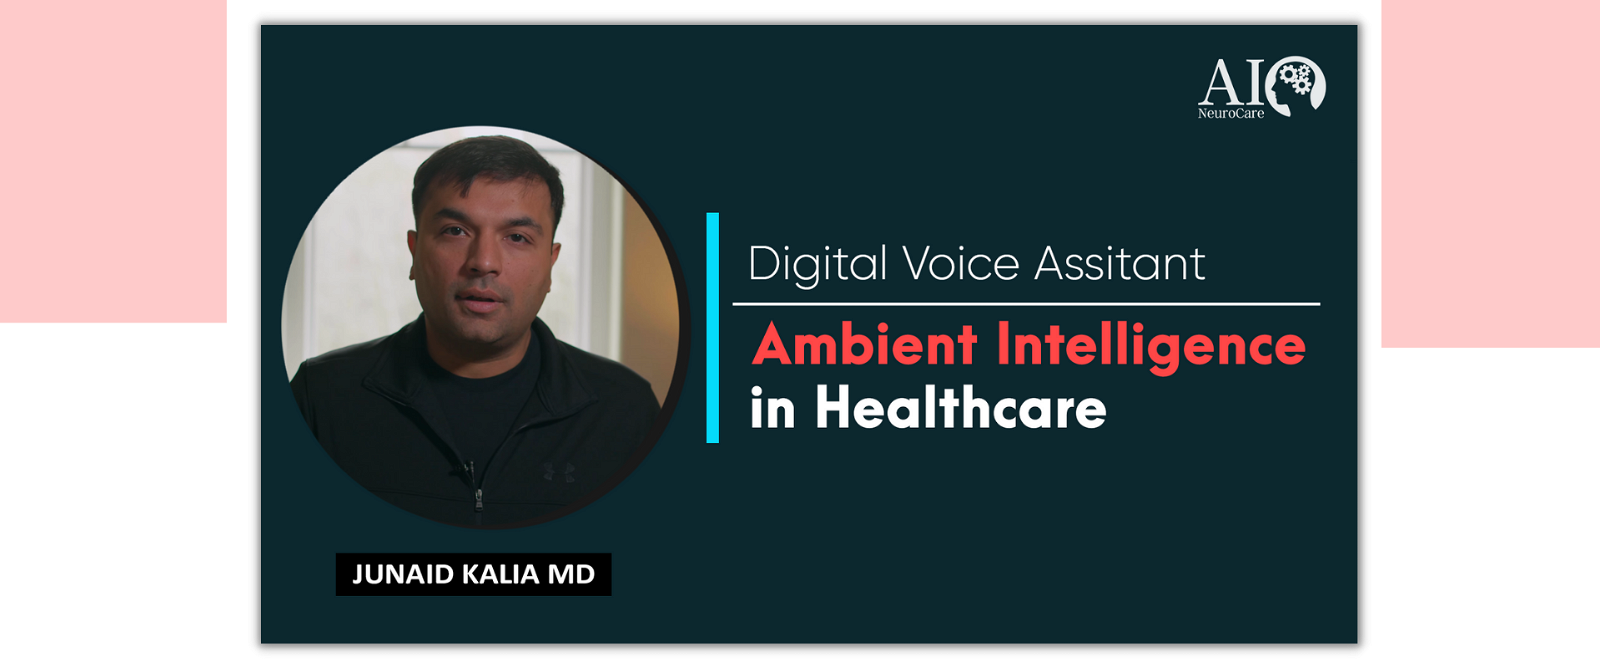 Ambient Intelligence in Healthcare